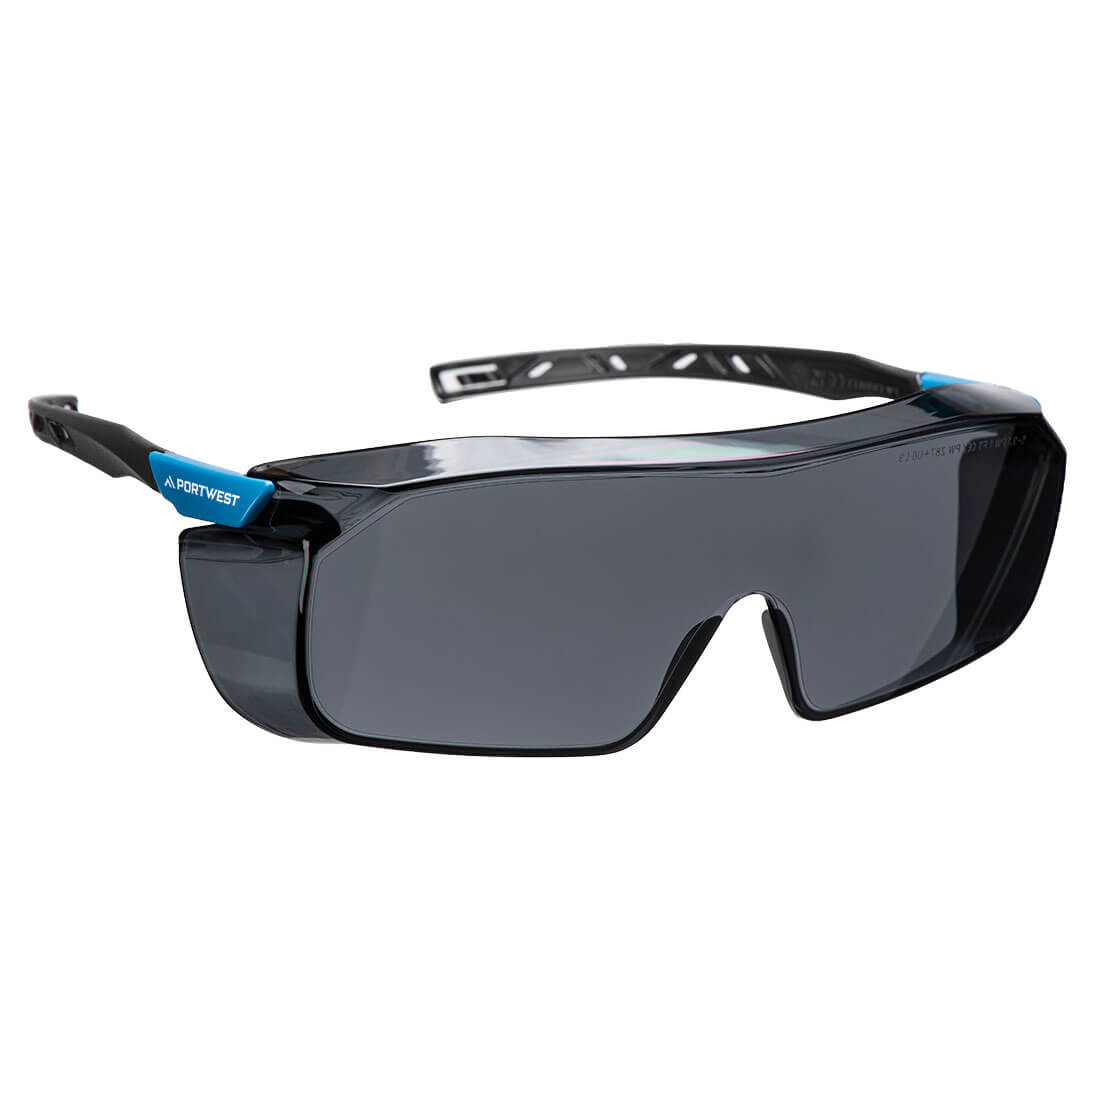 Top OTG Safety Glasses - Personal protection